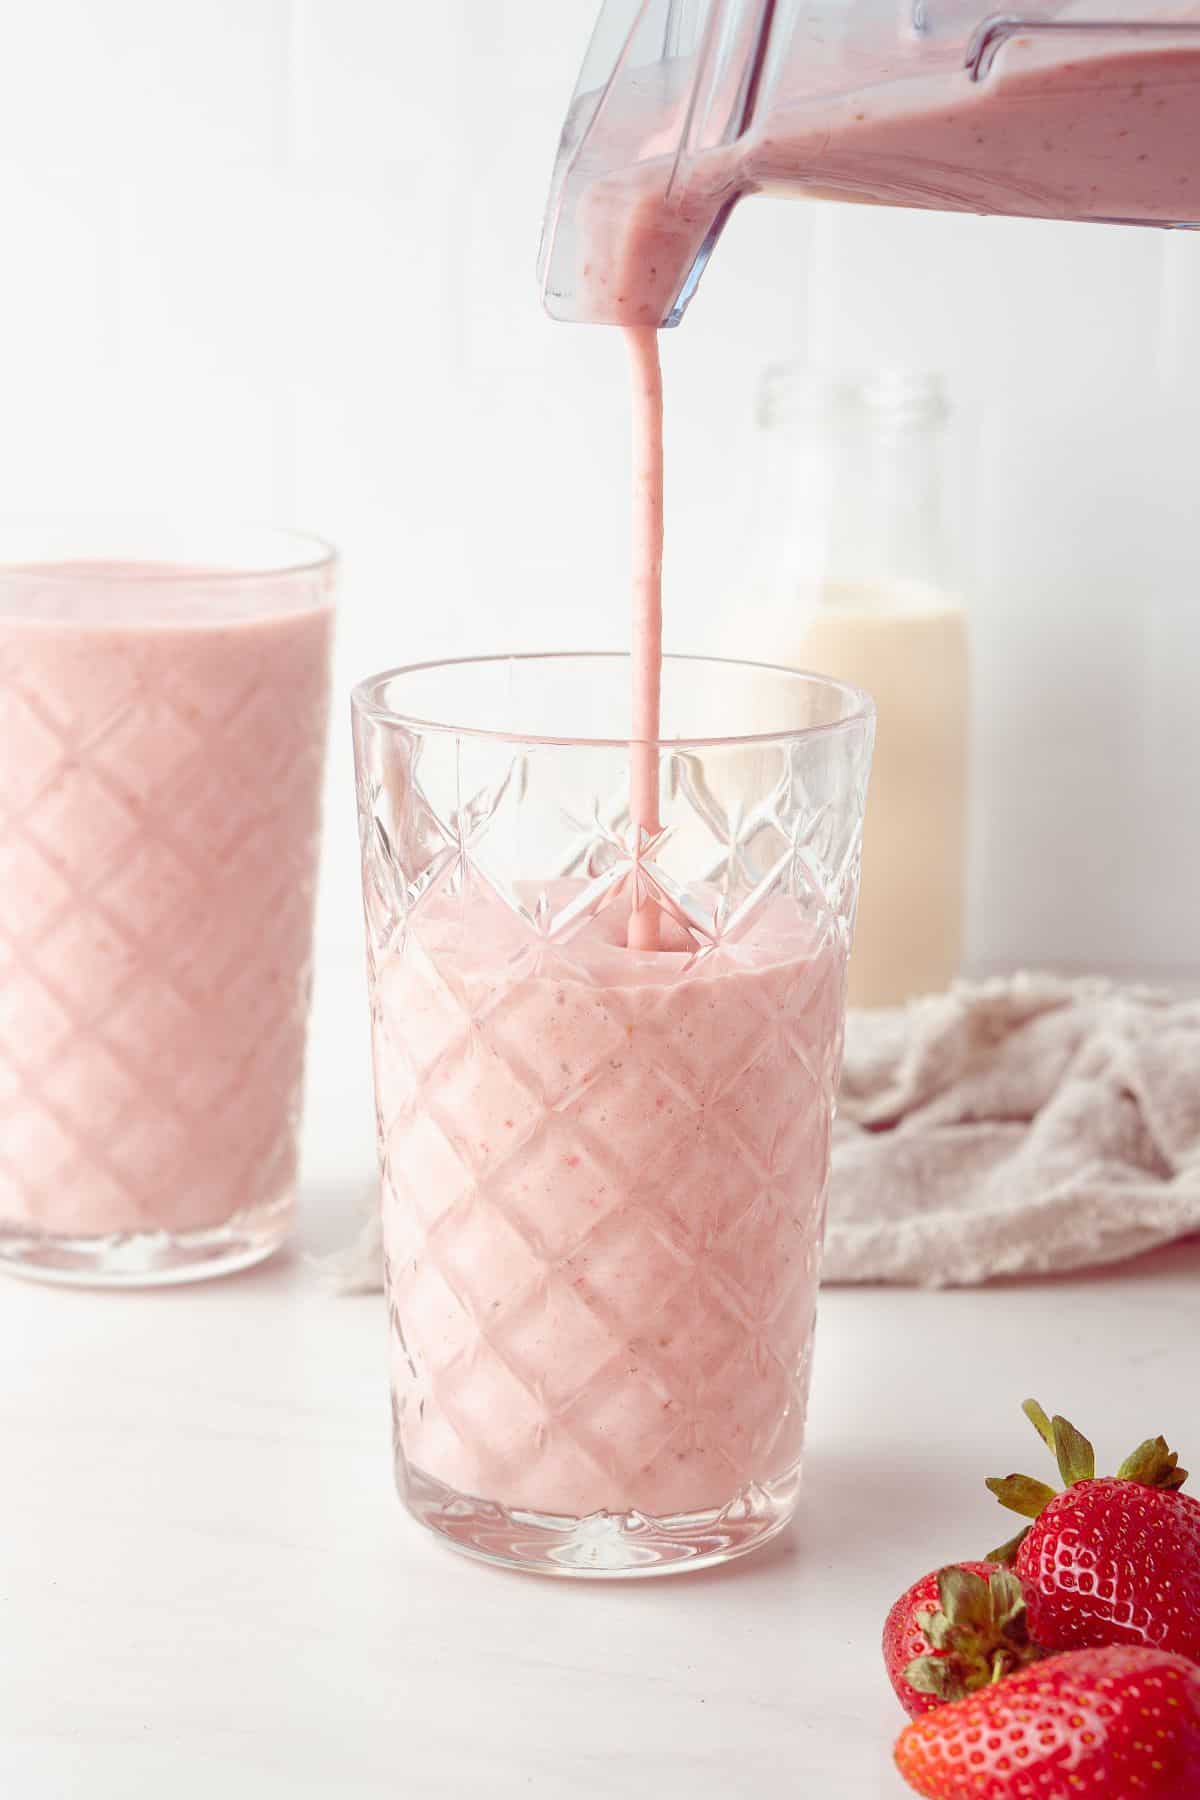 Strawberry and Banana Smoothie being poured into a glass from the blender.